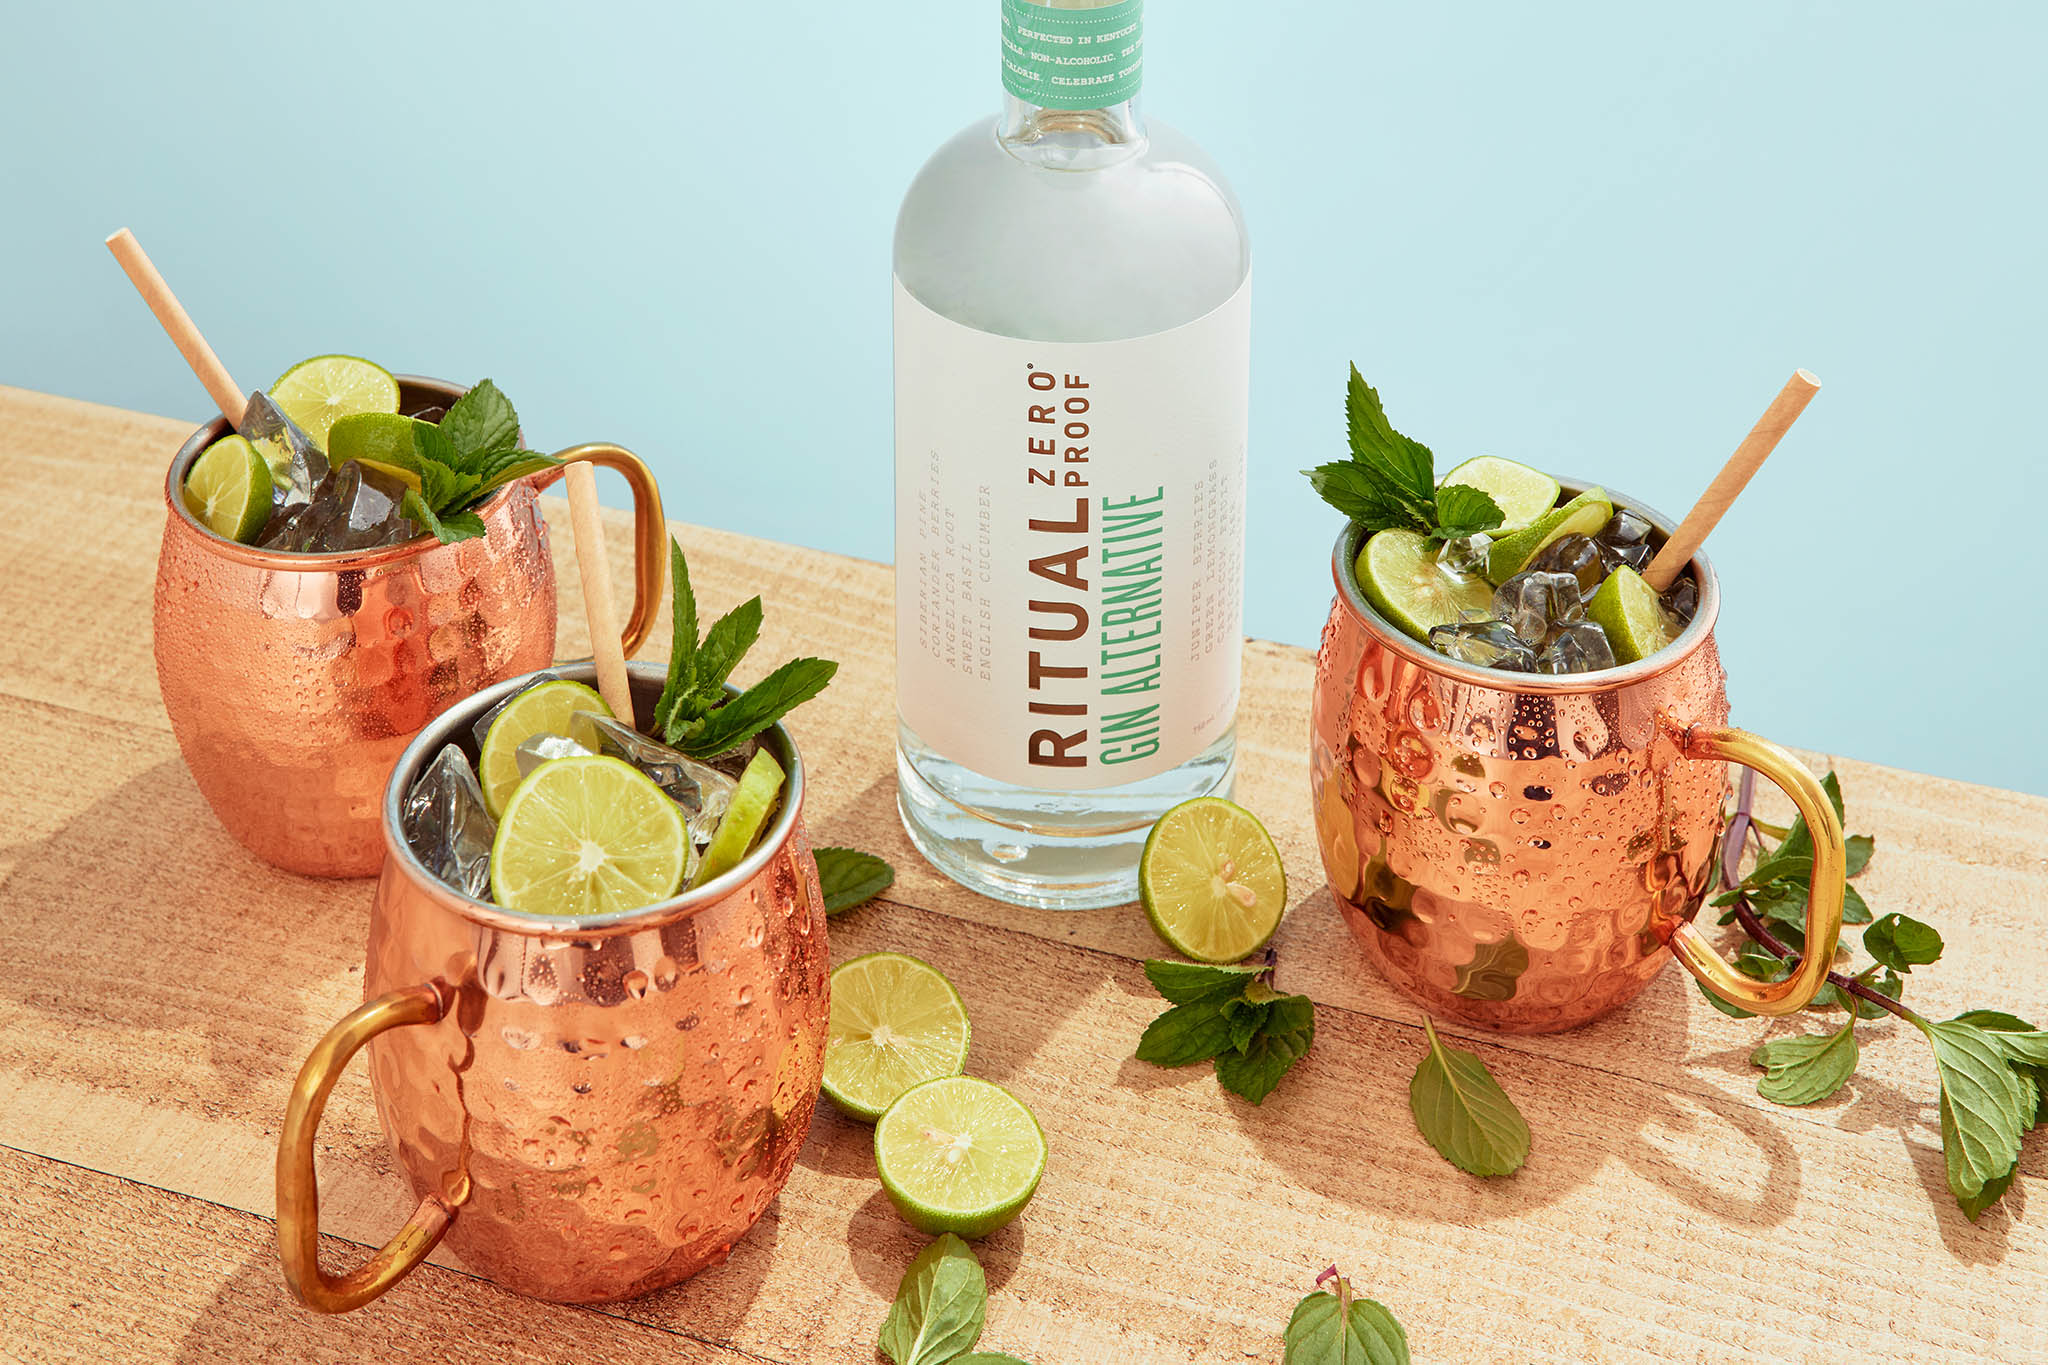 Holiday Moscow Mule with Pomegranate and Sage